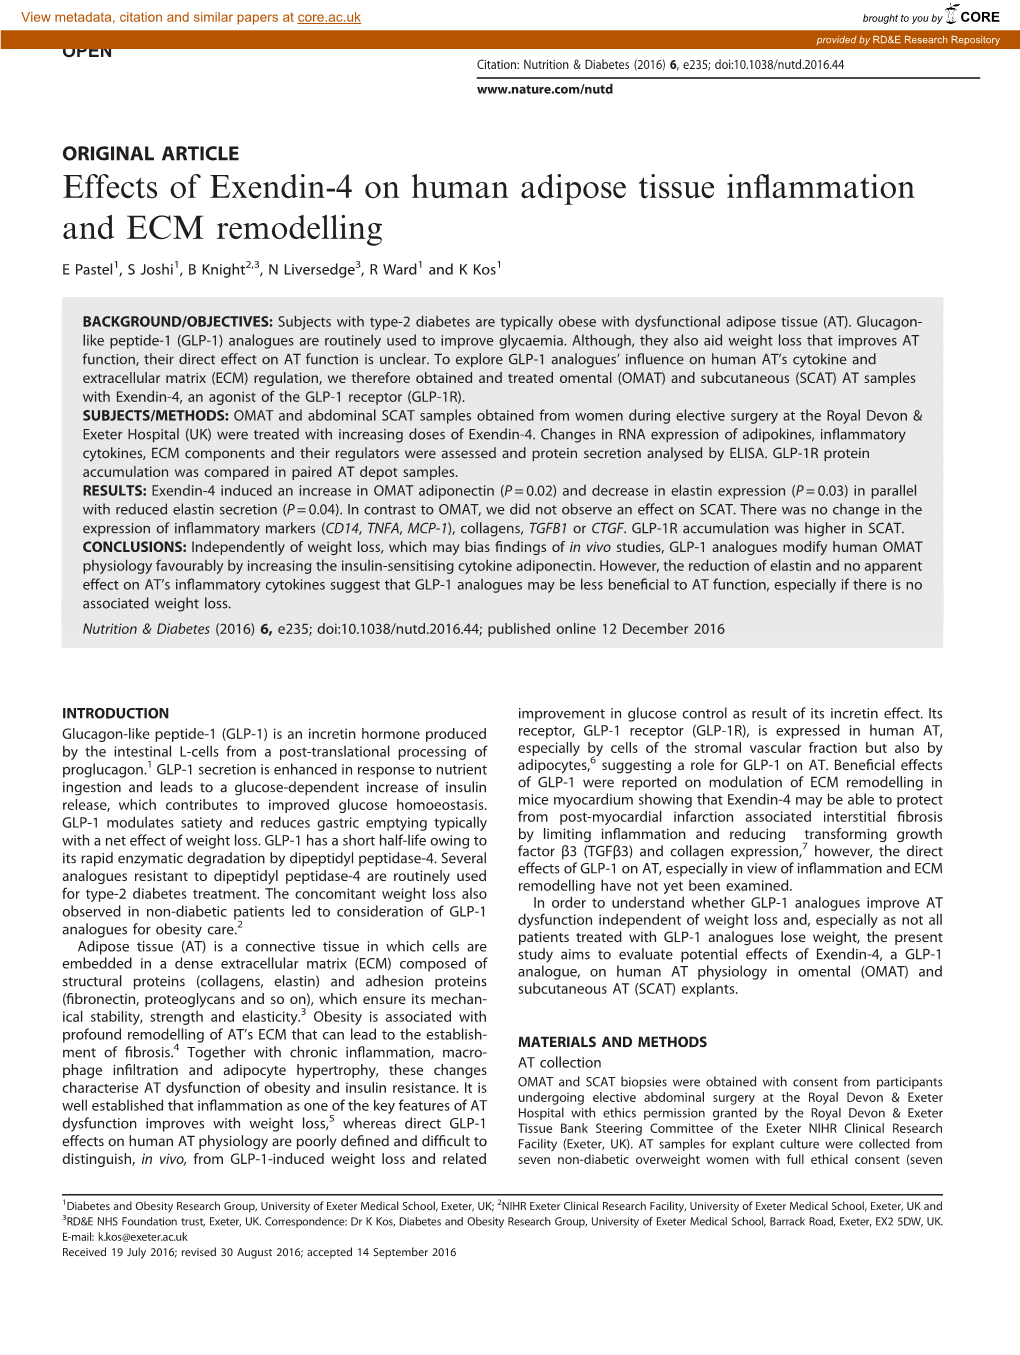 Effects of Exendin-4 on Human Adipose Tissue Inflammation and ECM Remodelling